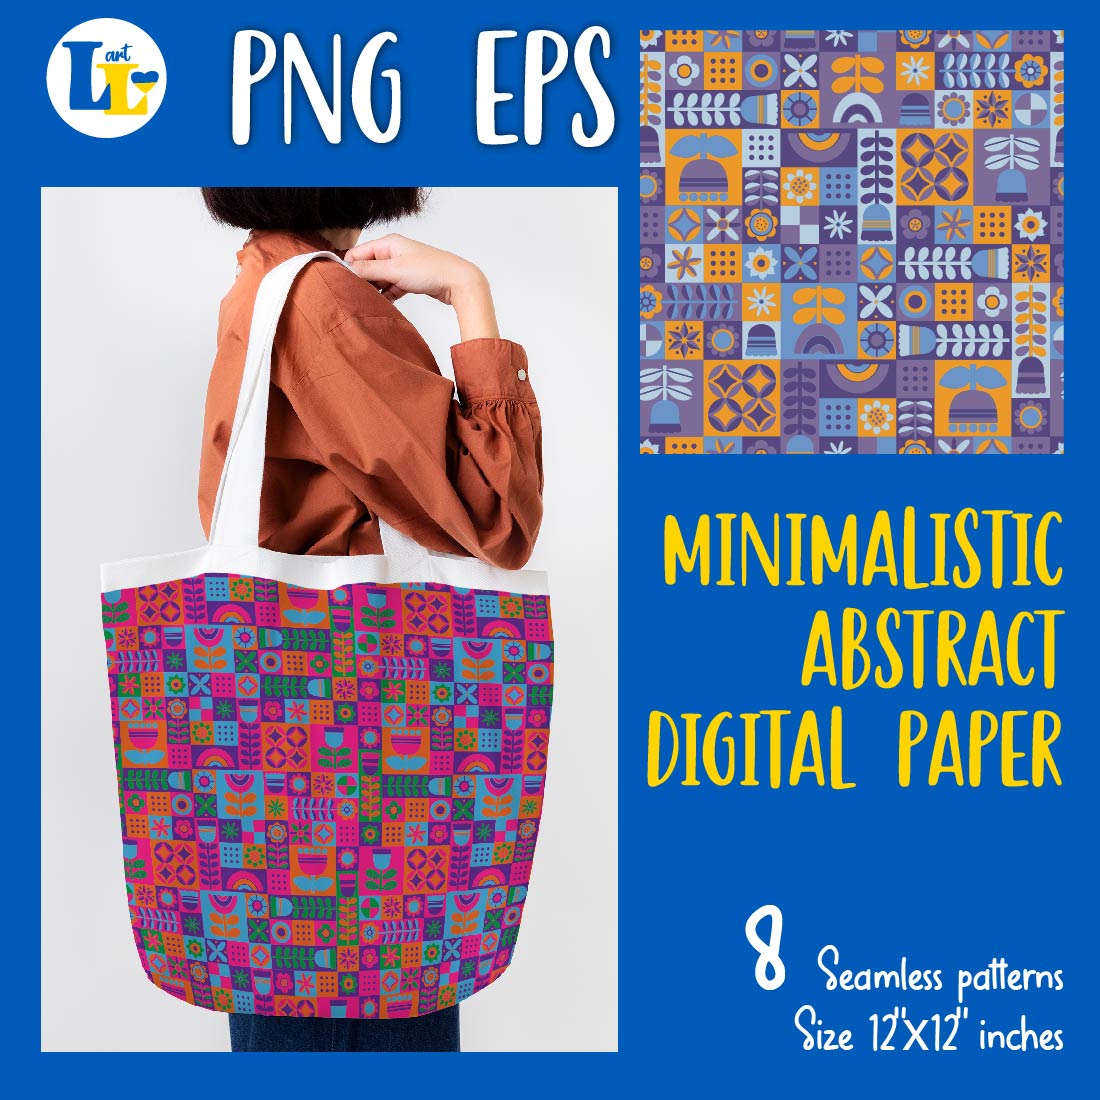 Woman carrying a colorful bag with the text png eps.